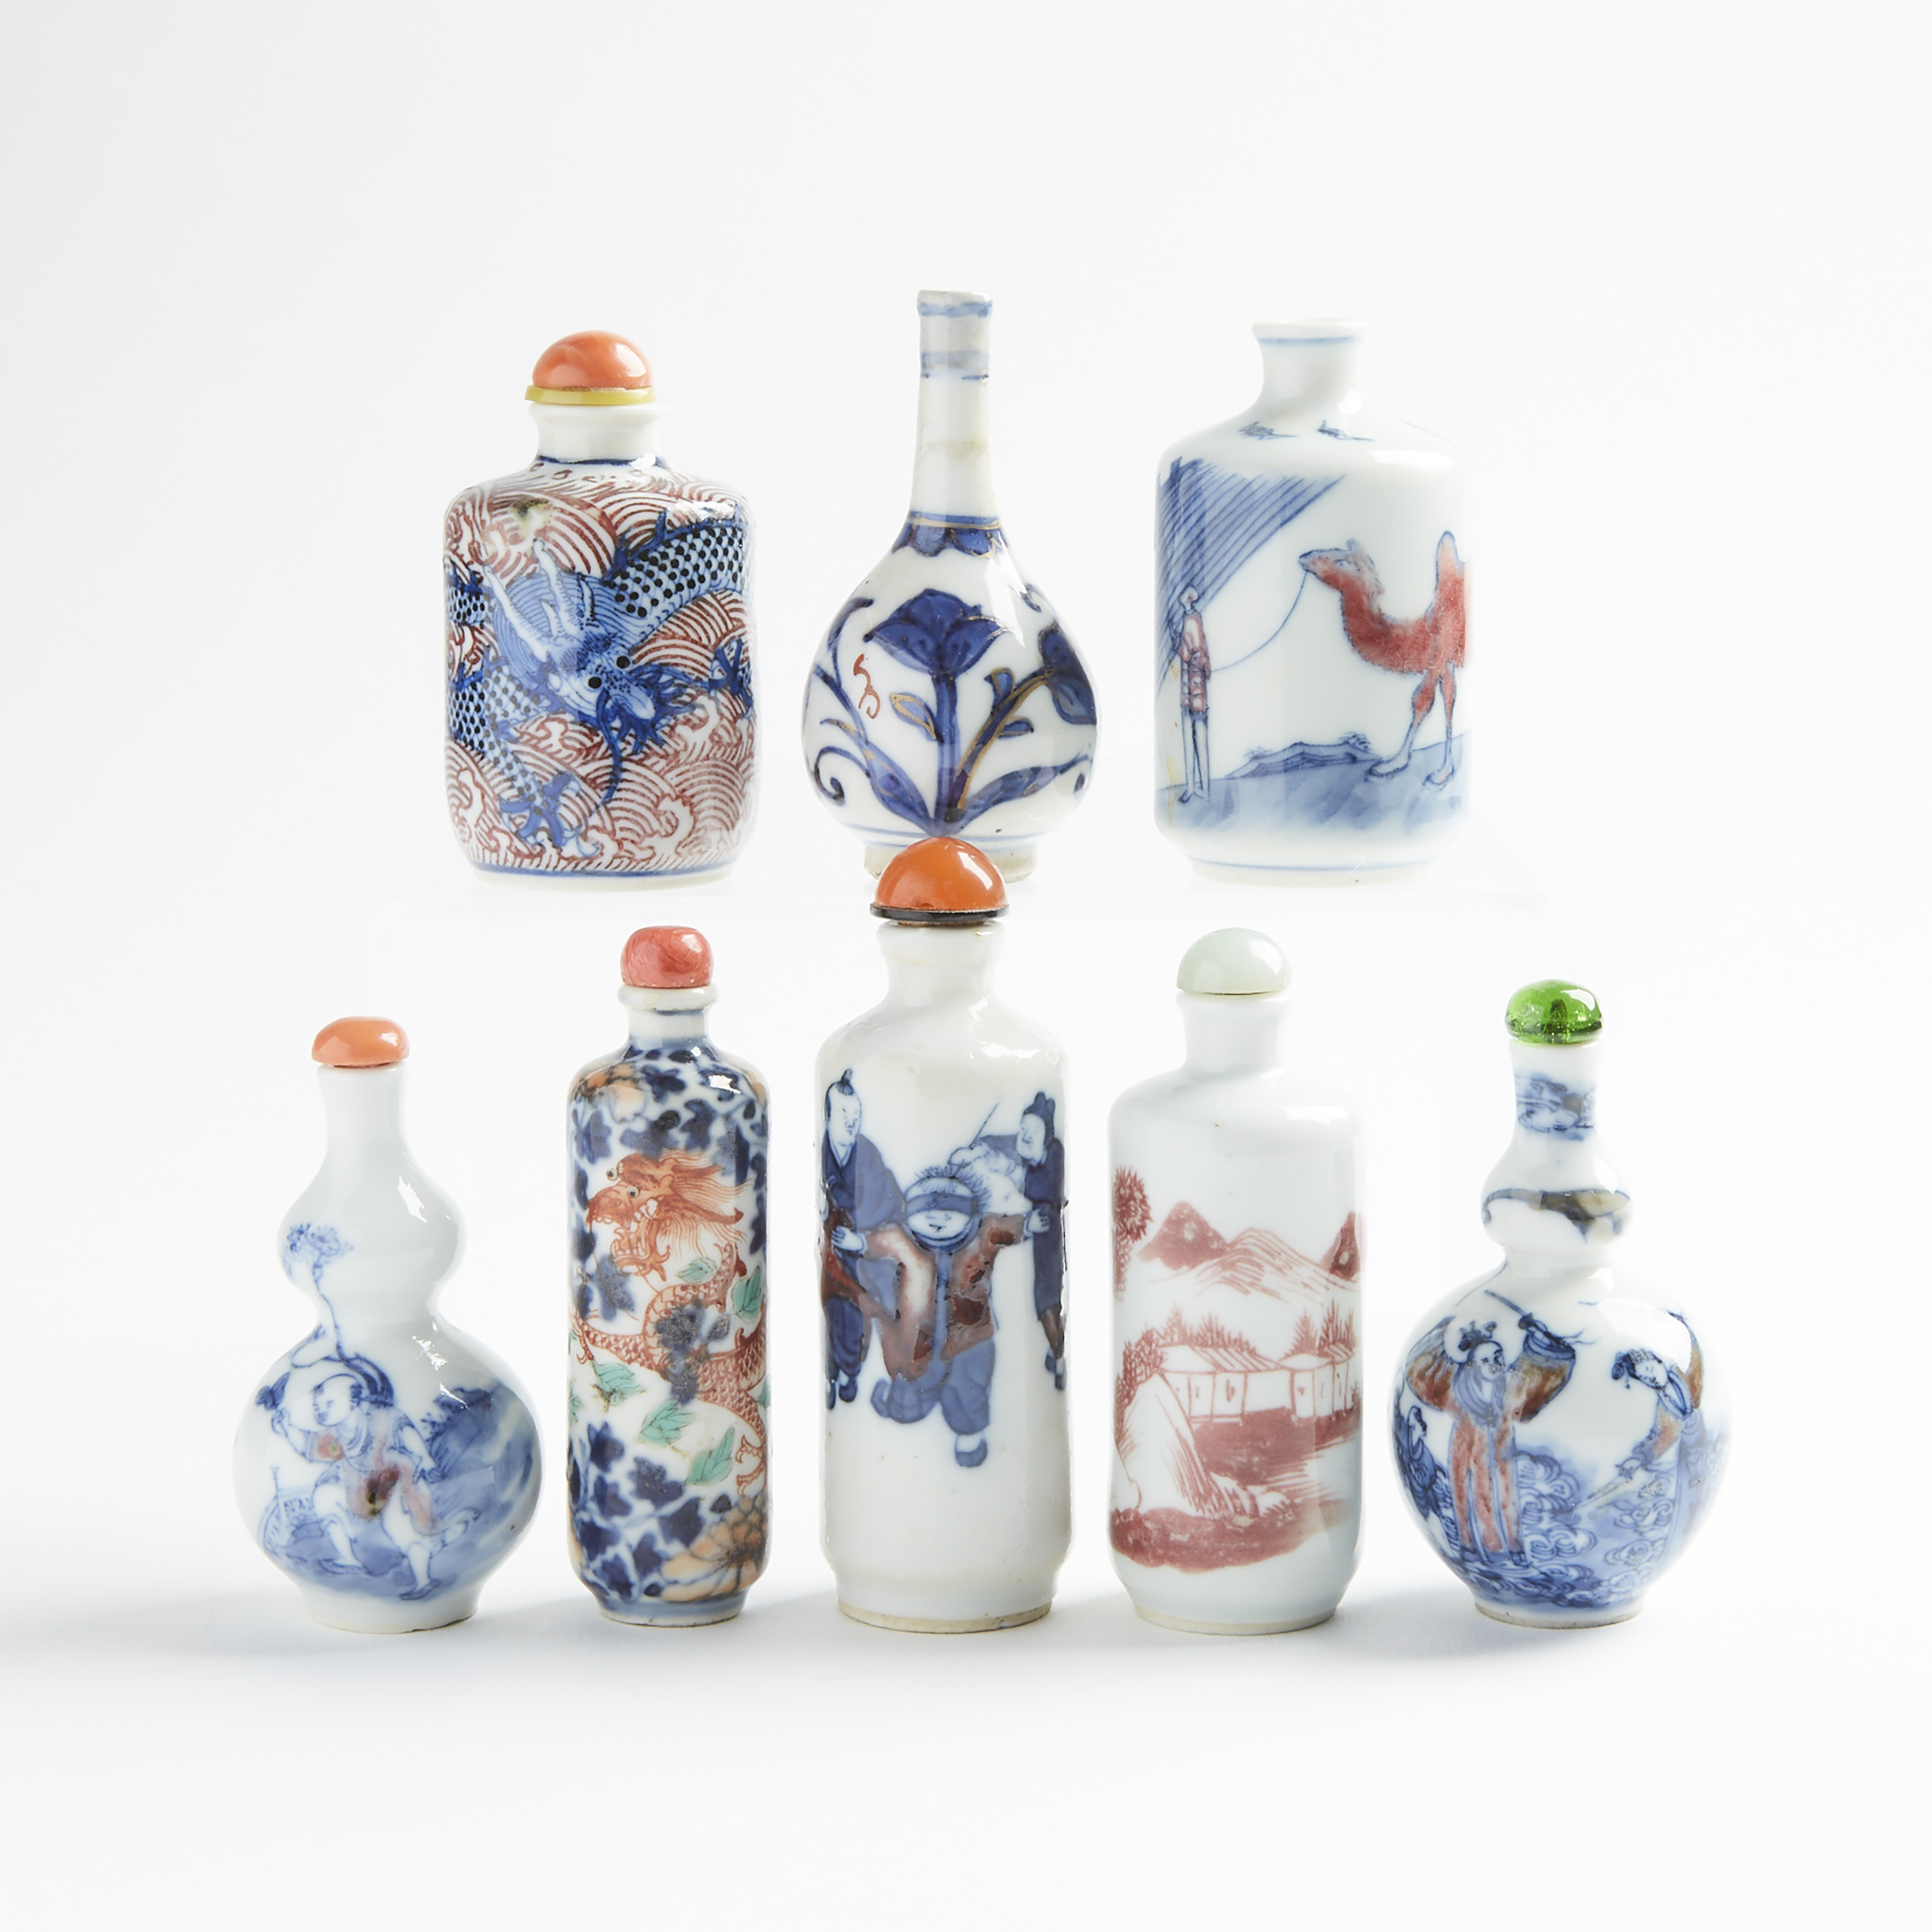 A Group of Eight Underglazed-Decorated Porcelain Snuff Bottles, 19th/20th Century